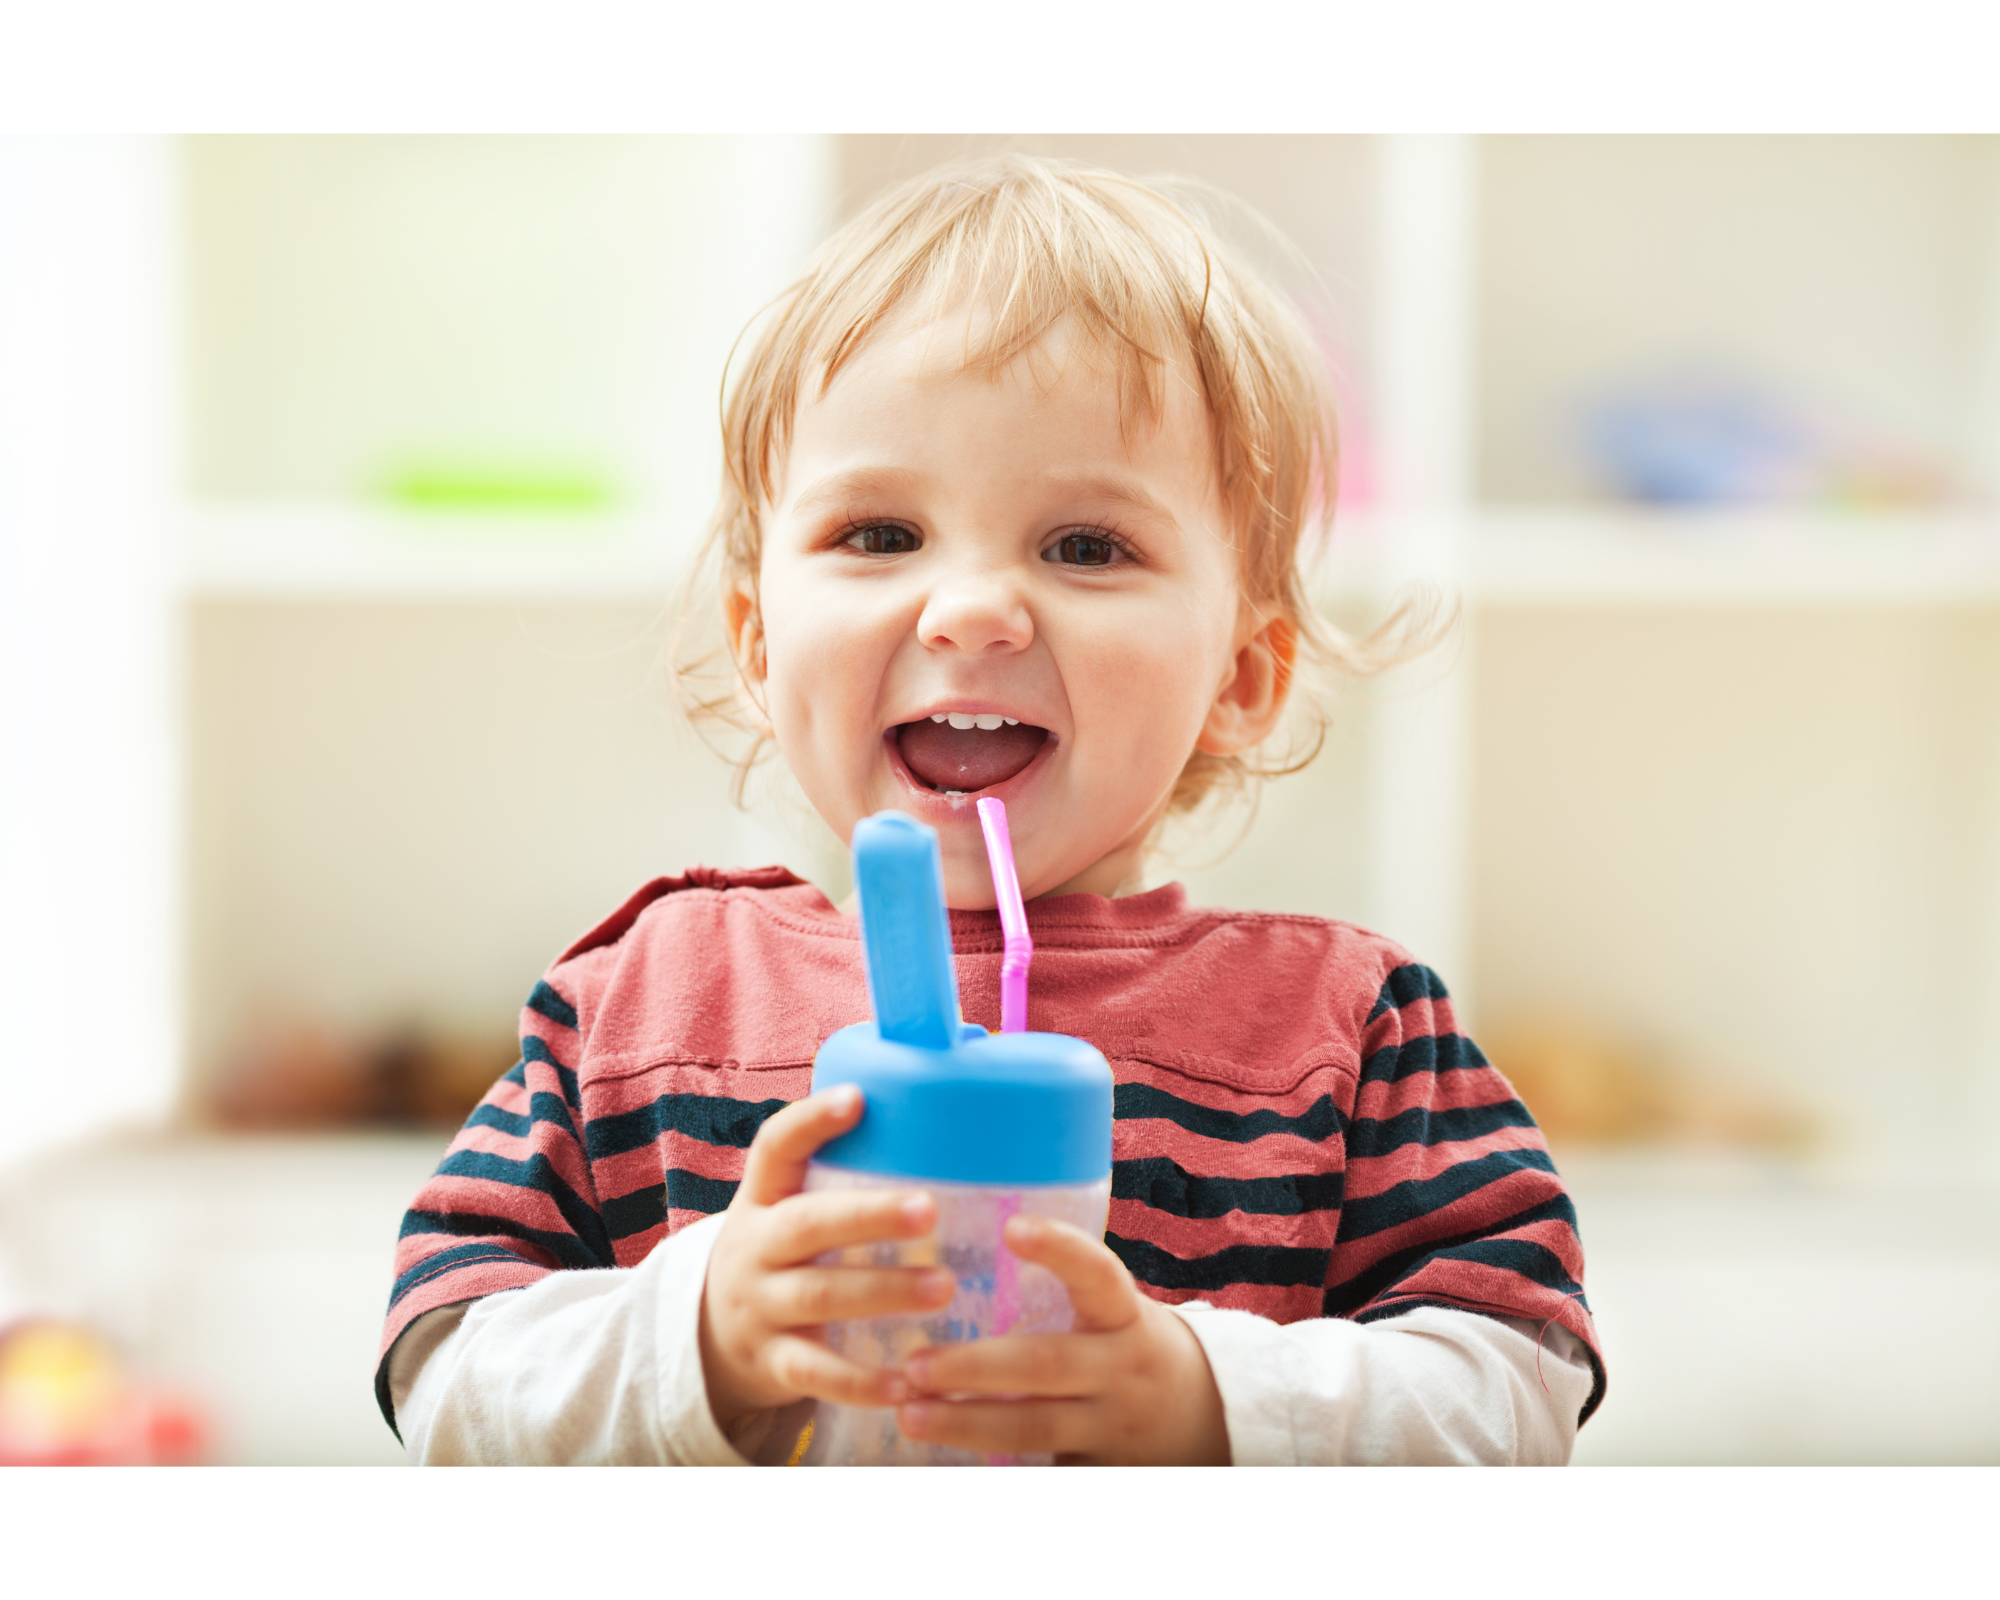 Should Toddlers Drink From a Straw?